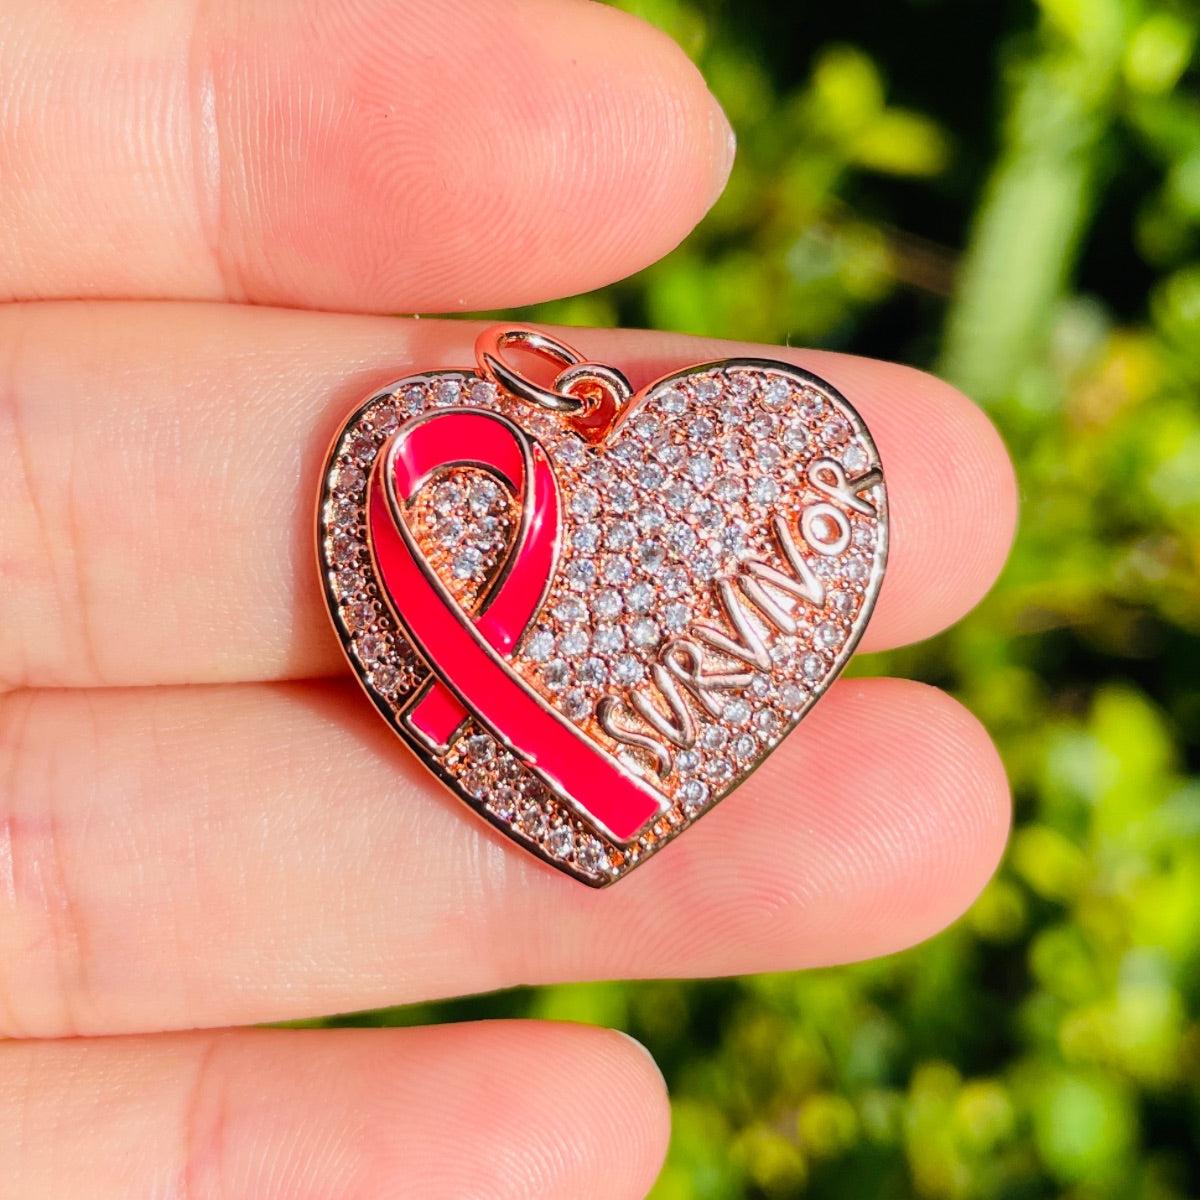 10pcs/lot CZ Pave Pink Ribbon Heart Survivor Word Charms - Breast Cancer Awareness Rose Gold CZ Paved Charms Breast Cancer Awareness Hearts New Charms Arrivals Charms Beads Beyond